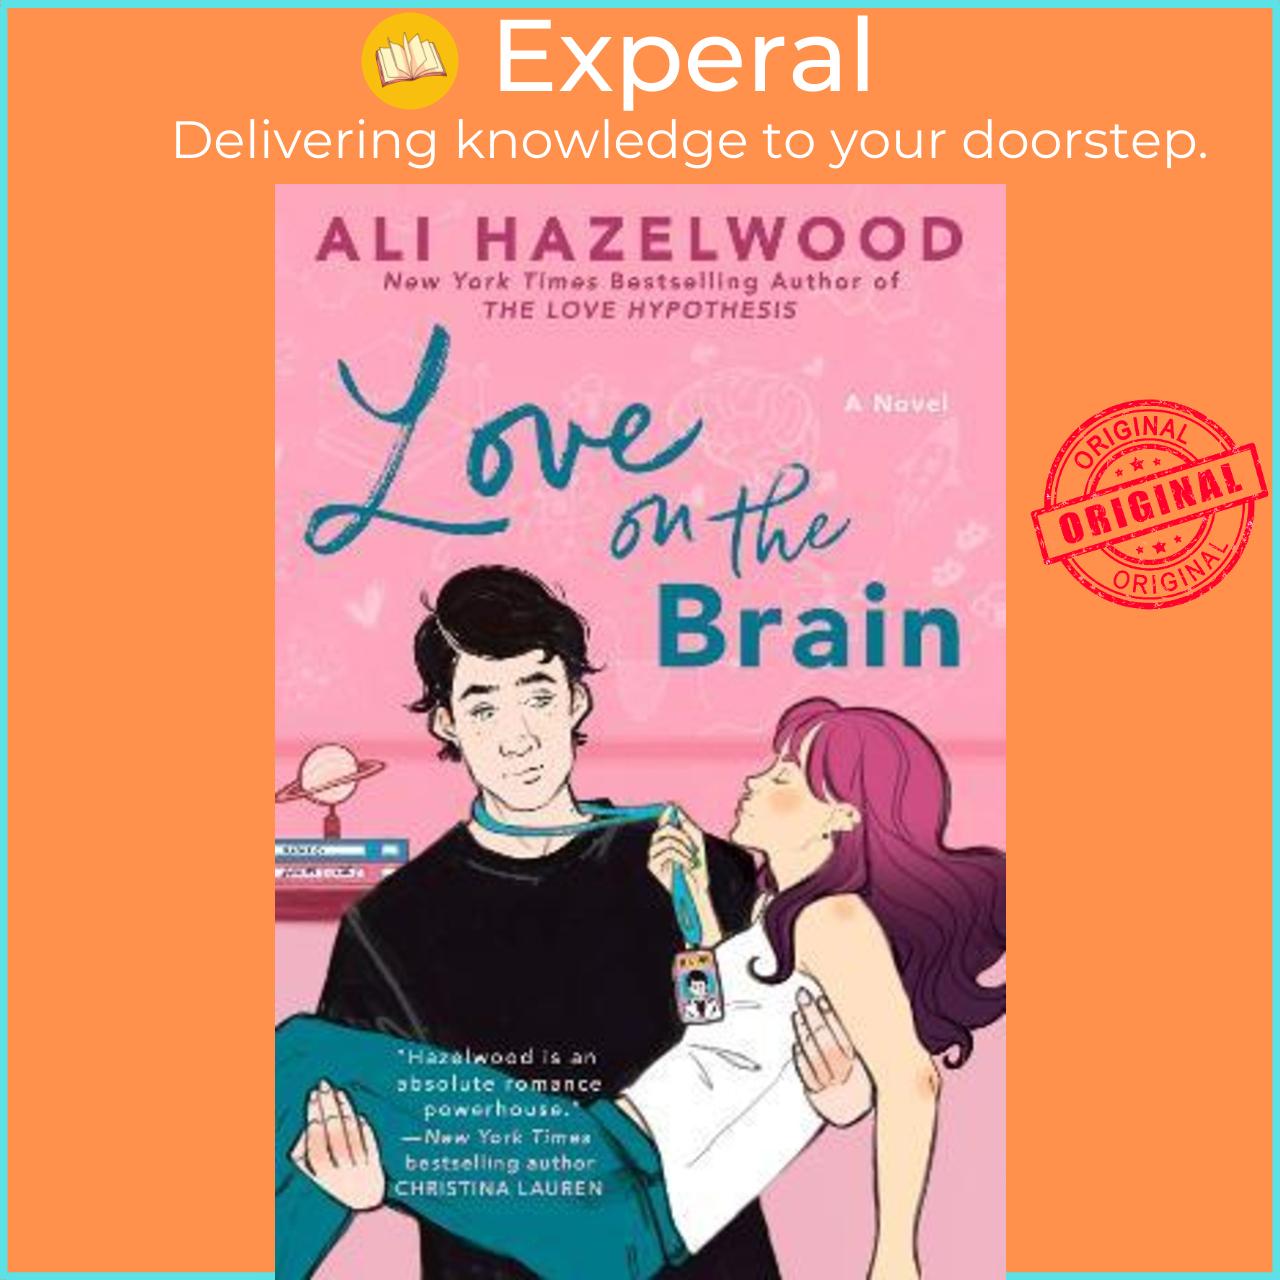 Sách - Love on the Brain by Ali Hazelwood (US edition, paperback)